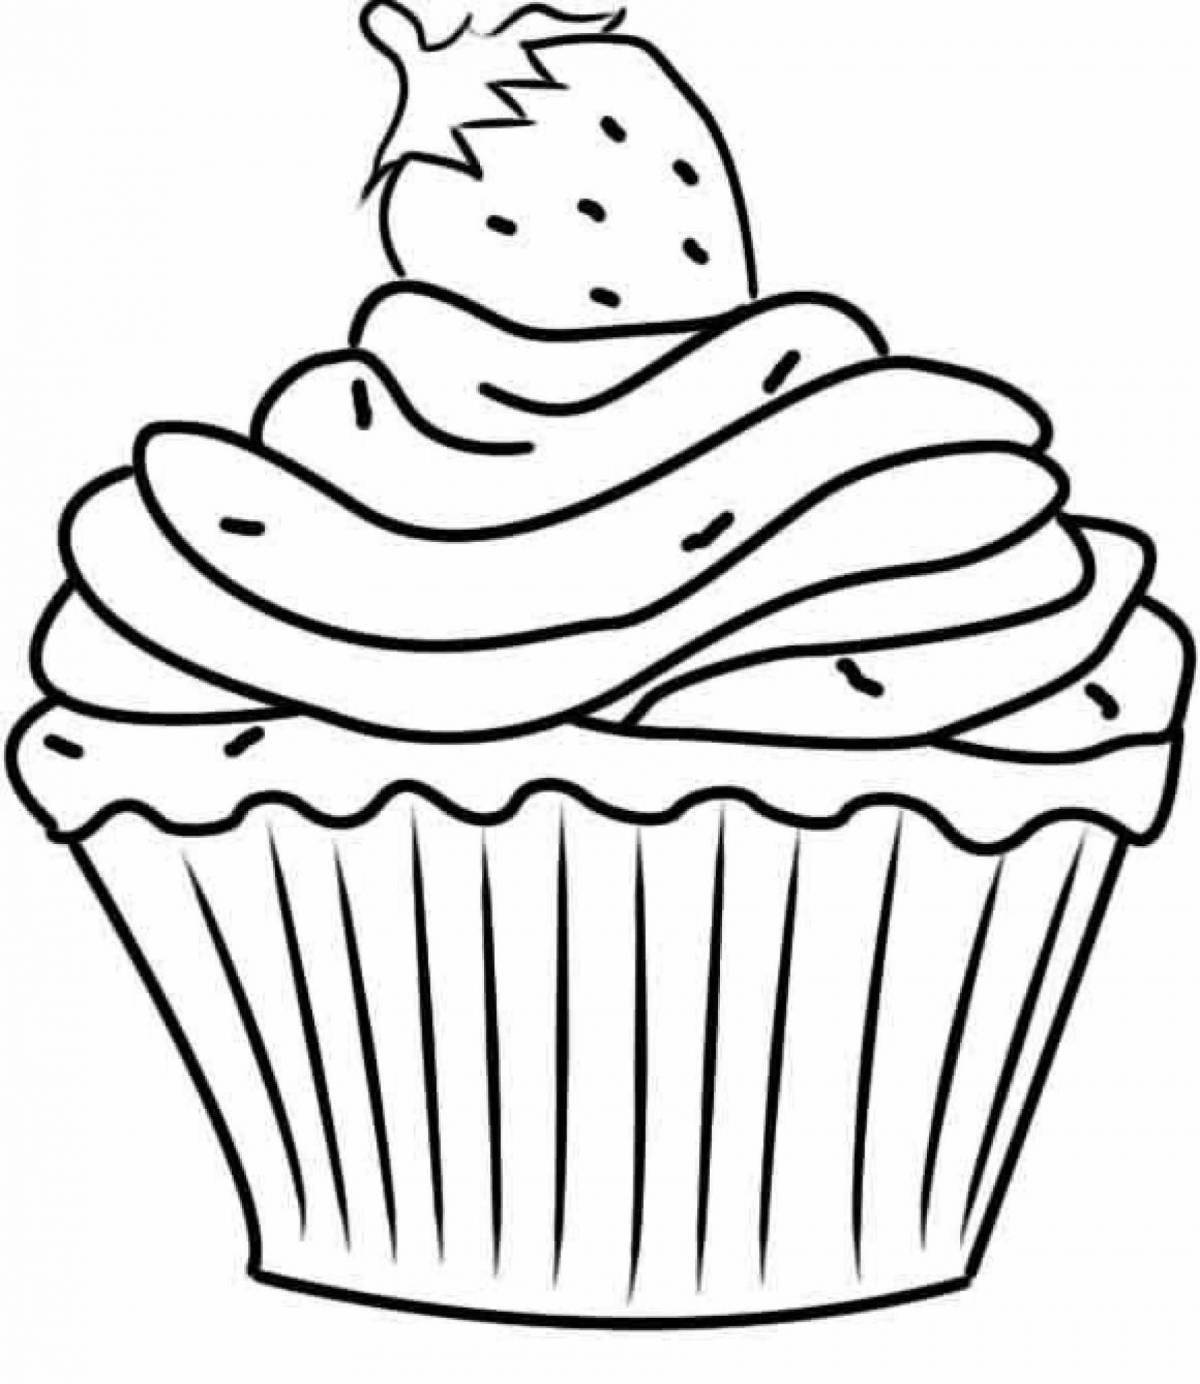 Taunting confectionery coloring pages